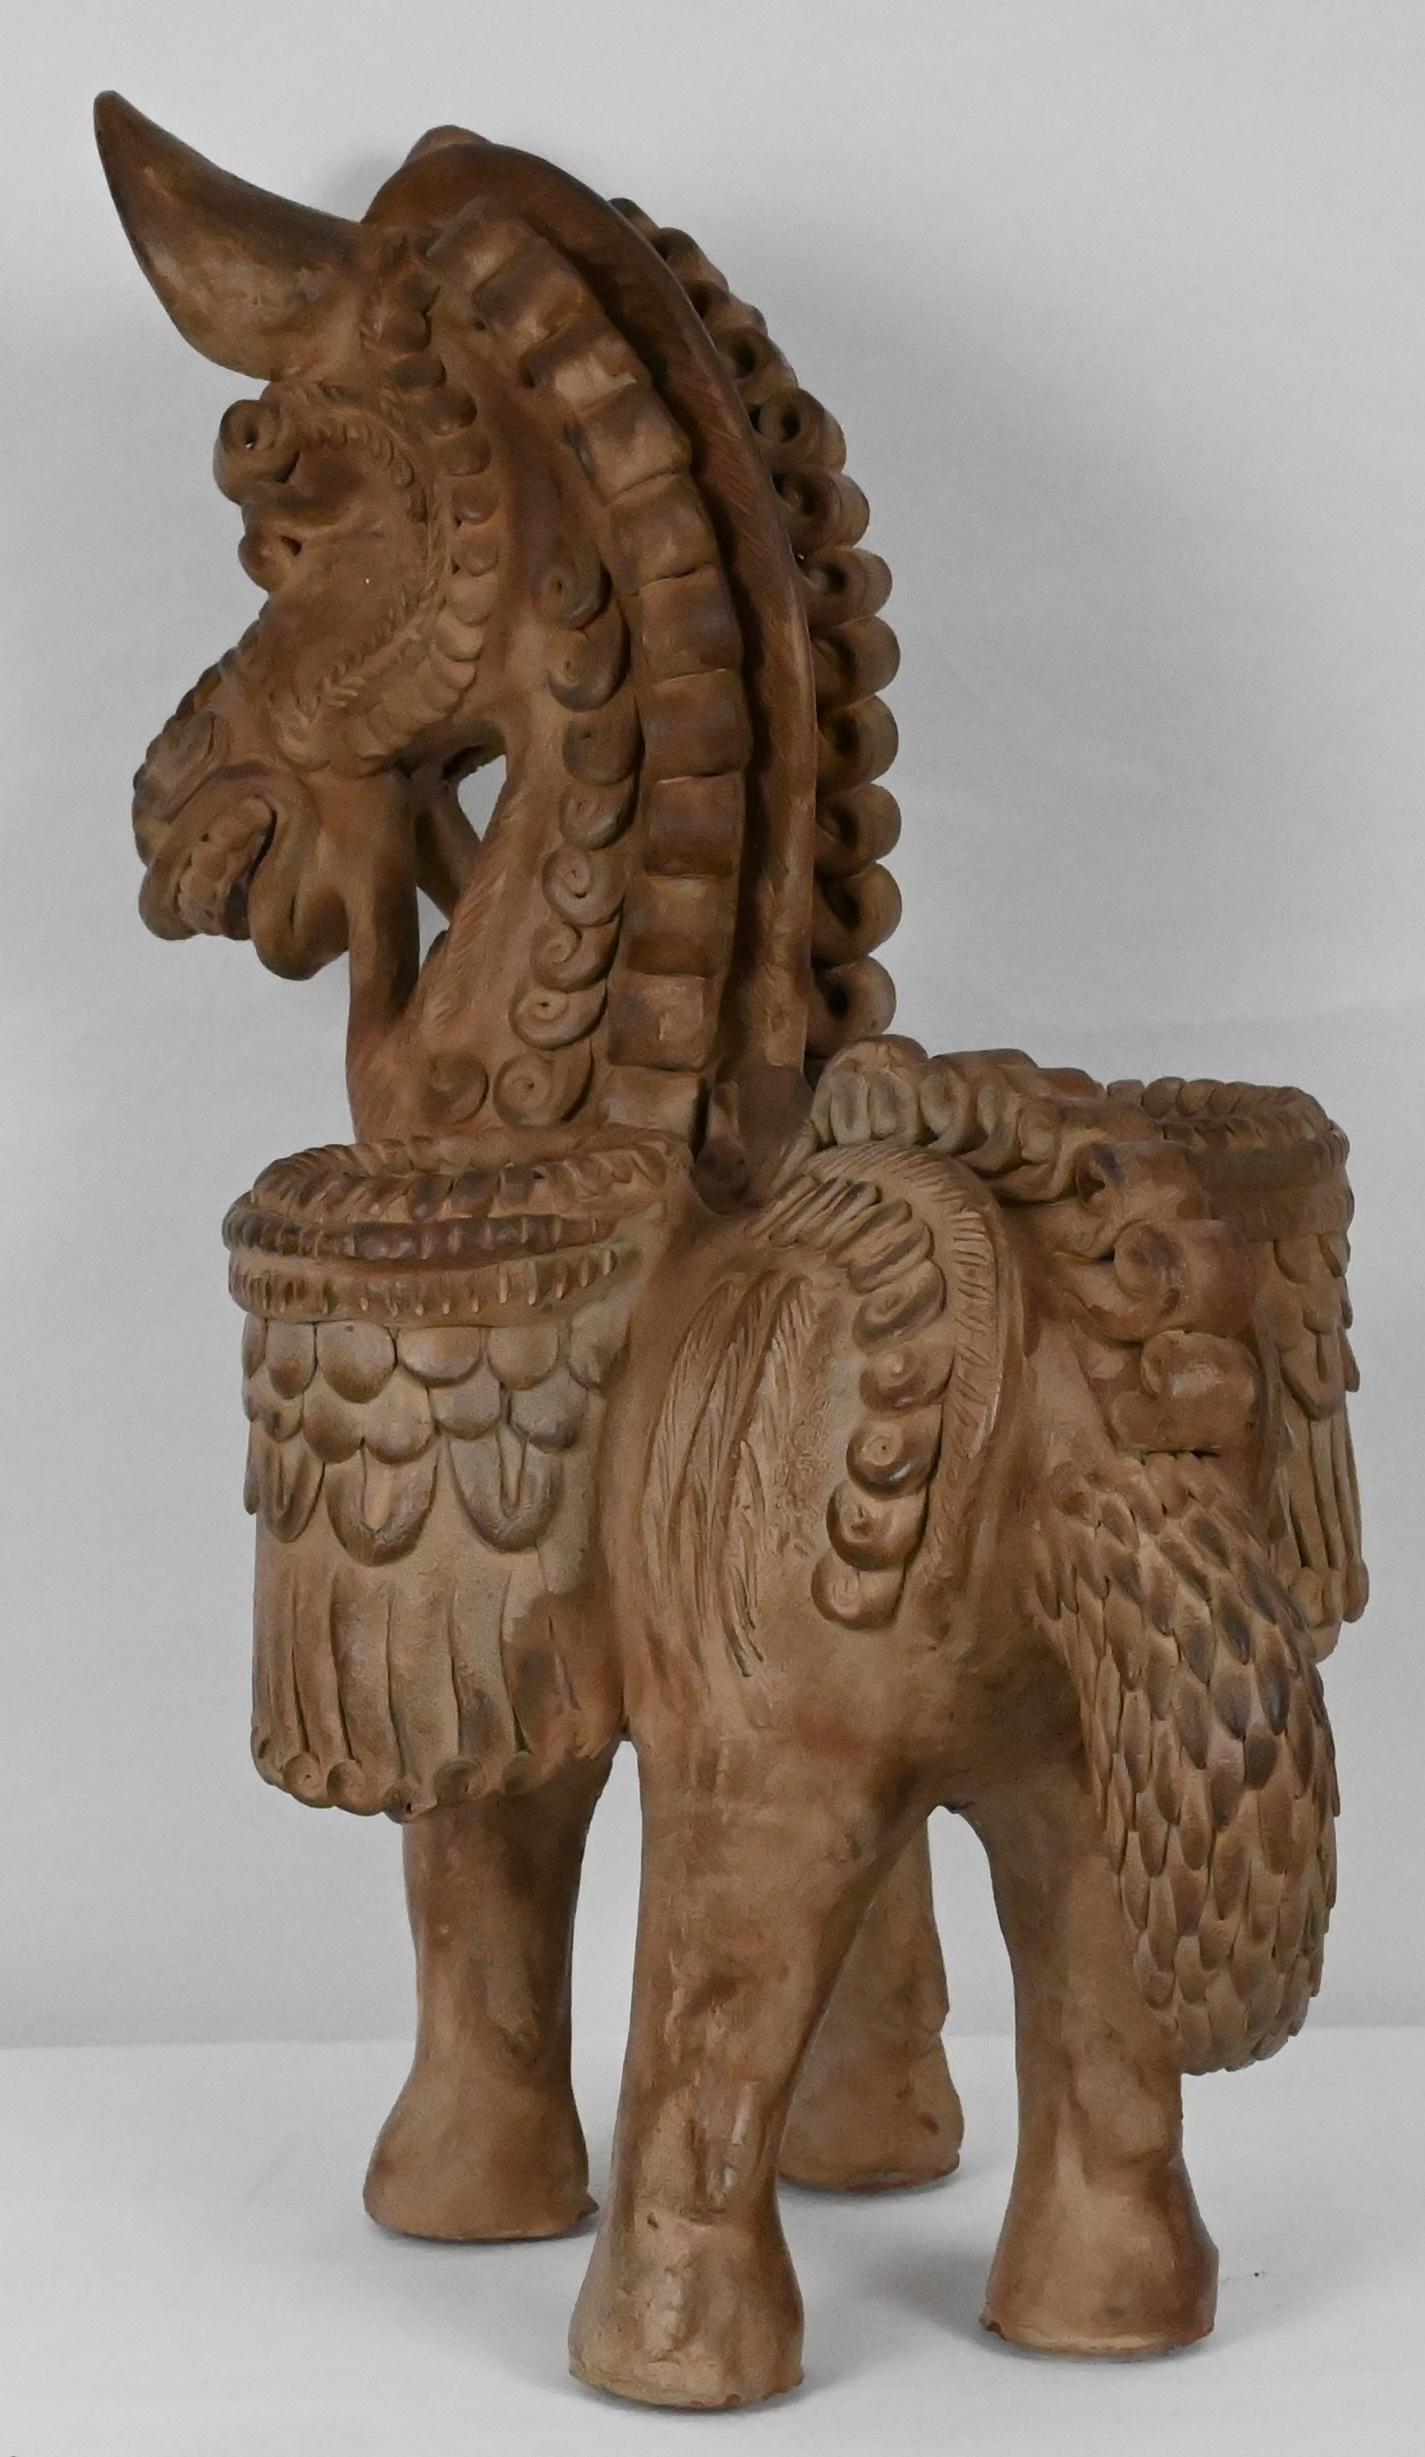 Hand-Crafted Hand Carved Terracotta Horse Sculpture by Ugo Zaccagnini For Sale